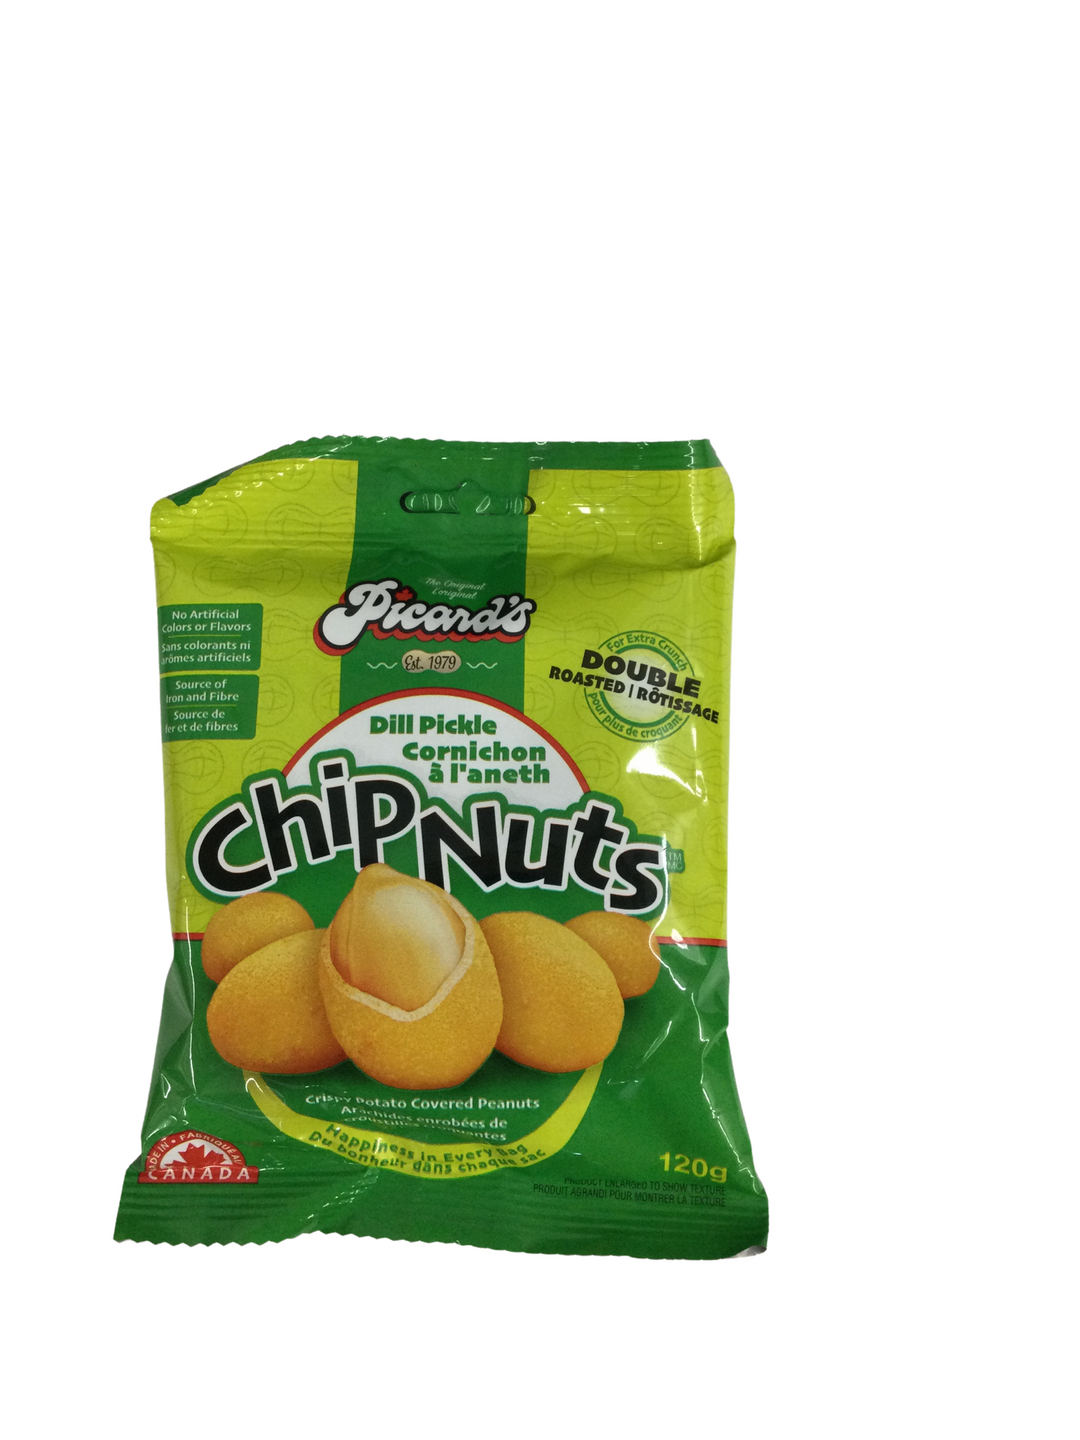 Picard’s Dill Pickle Chip Nuts